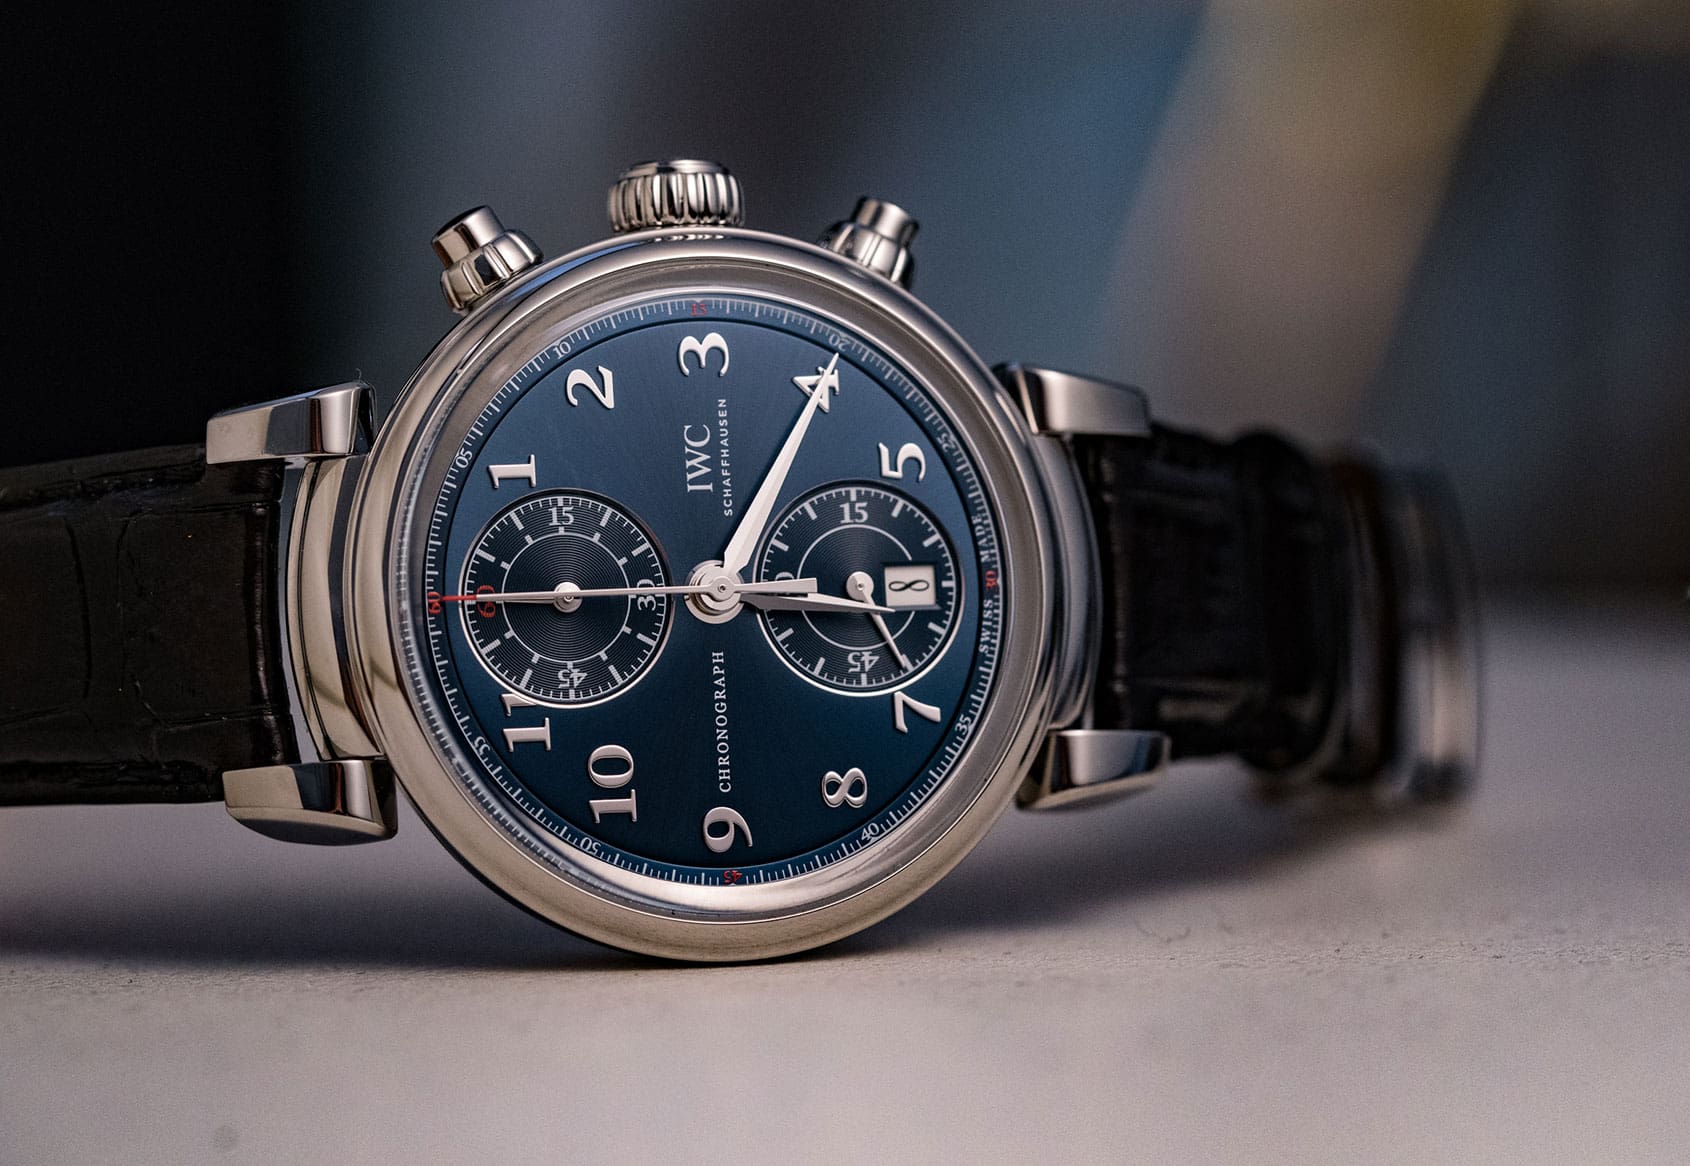 HANDS-ON: Not your typical sports chrono – the IWC Da Vinci Chronograph Edition “Laureus Sport for Good Foundation”